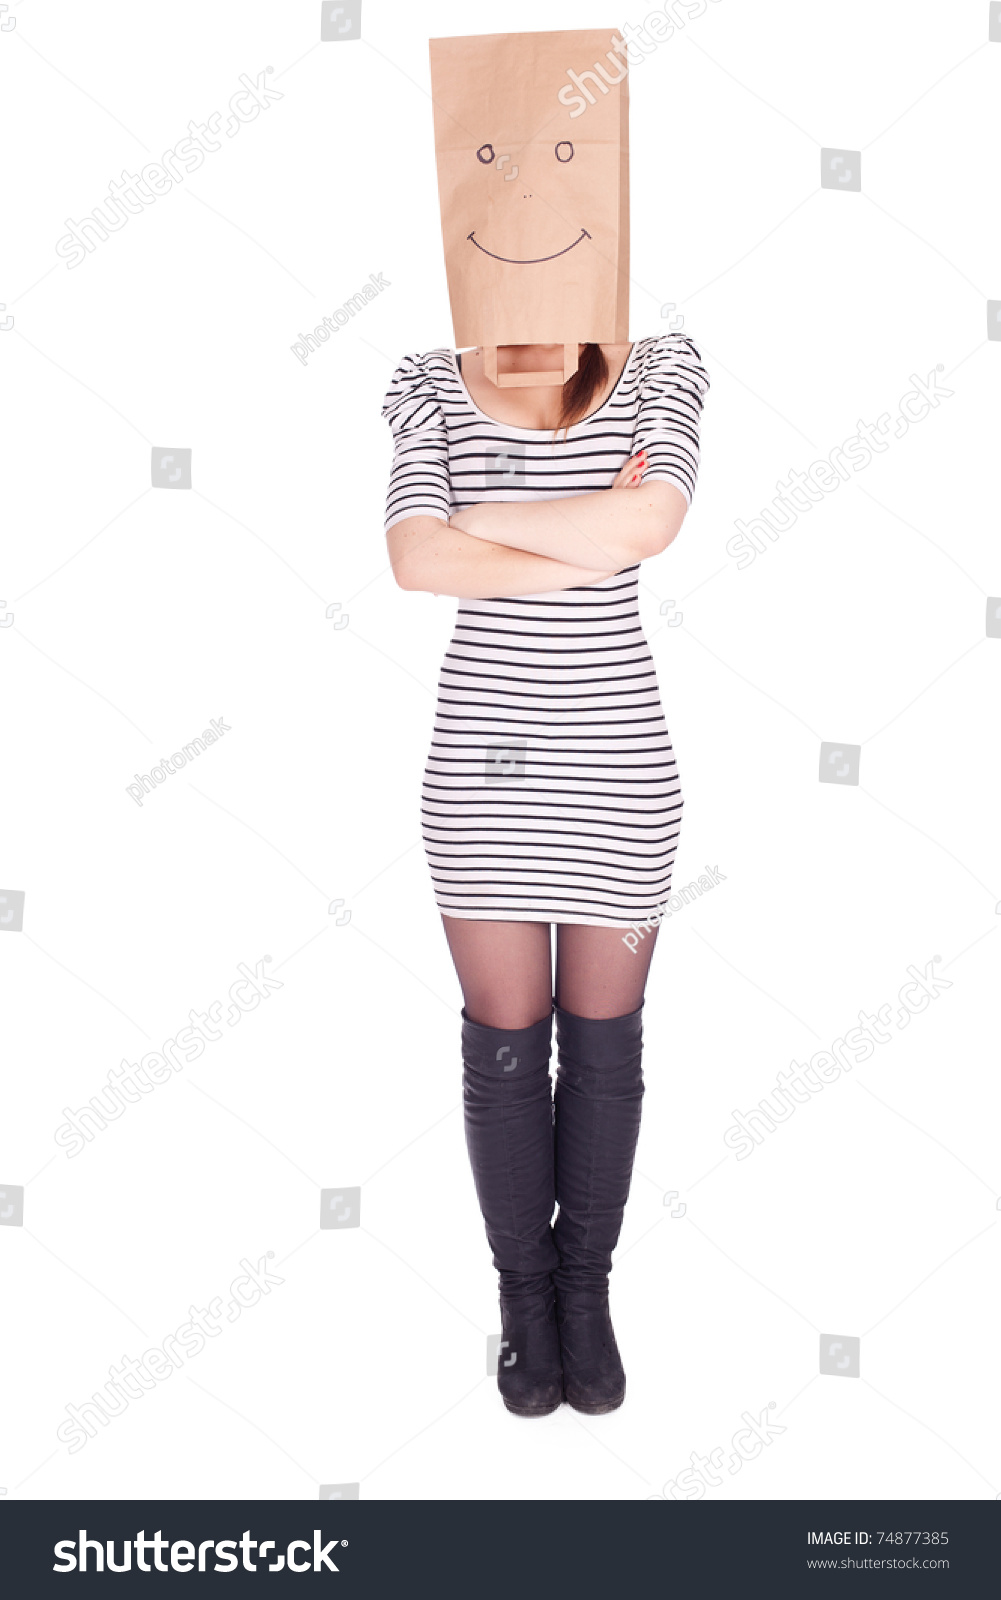 stock-photo-young-woman-in-smiling-ecological-paper-bag-on-head-series-74877385.jpg